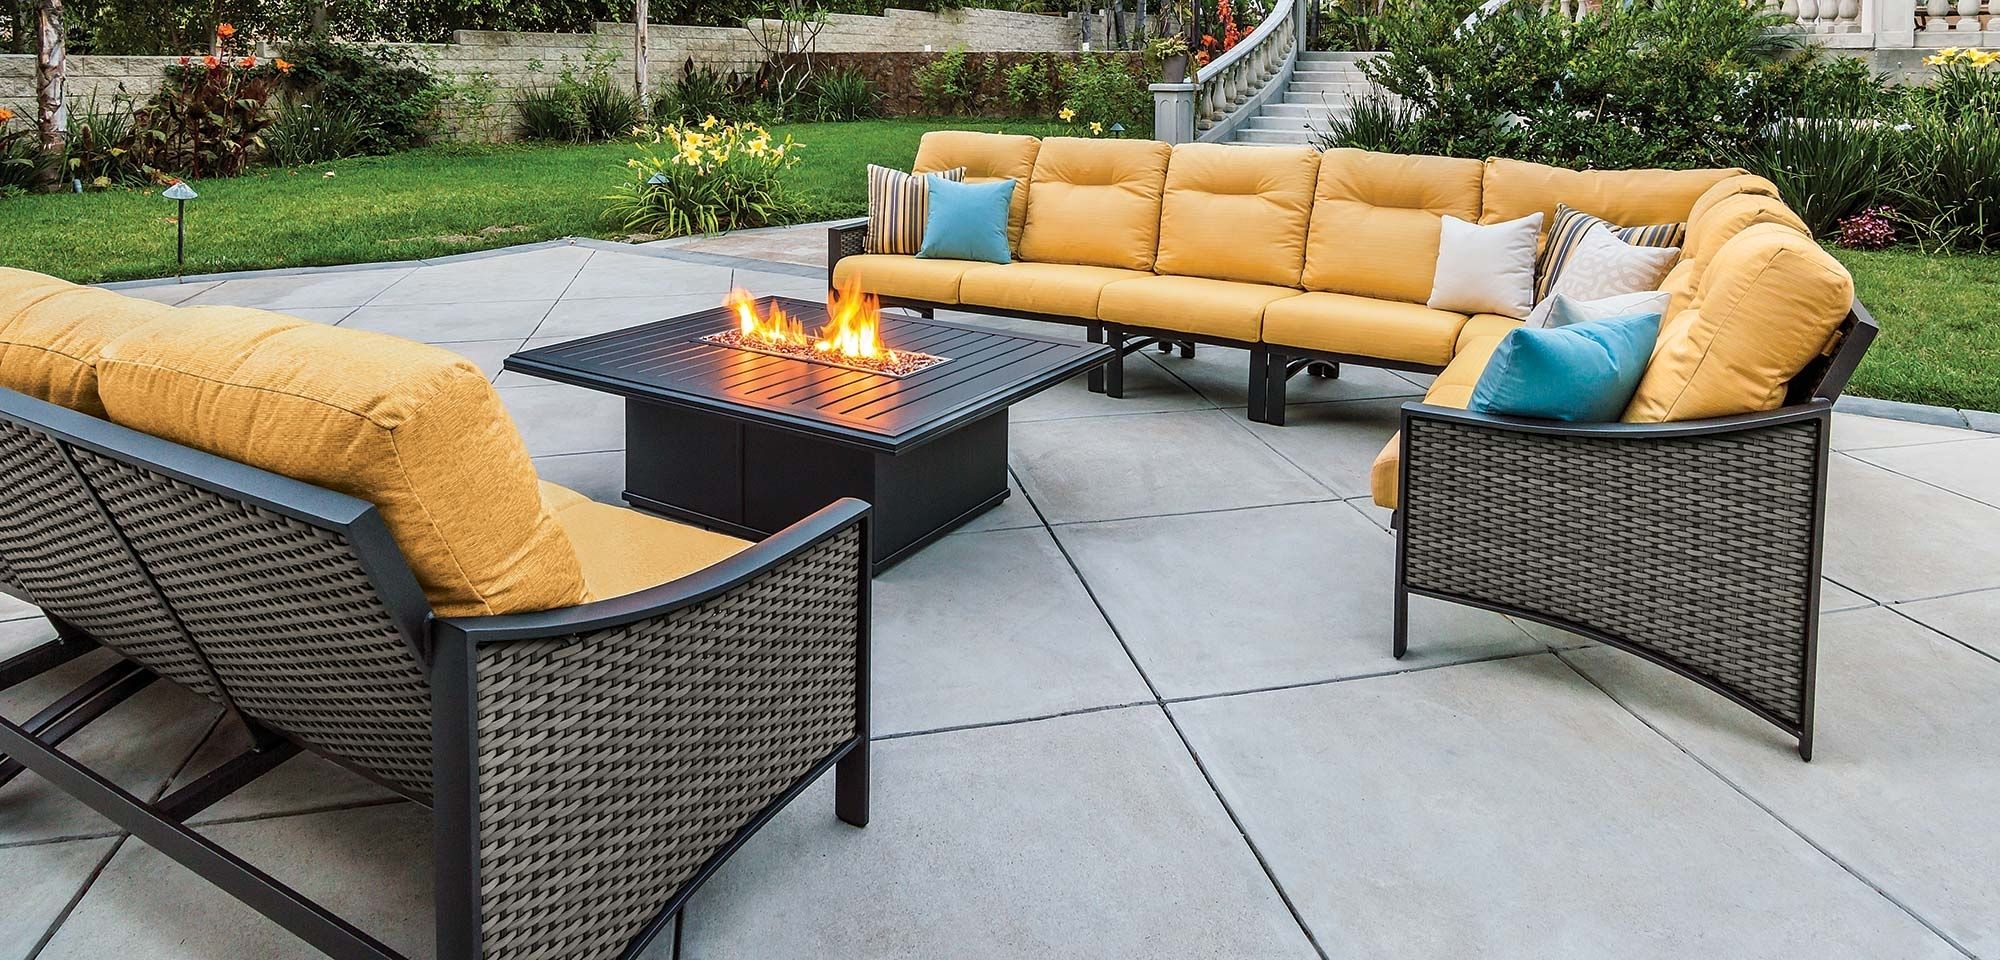 2018 Patio Furniture (View 19 of 20)